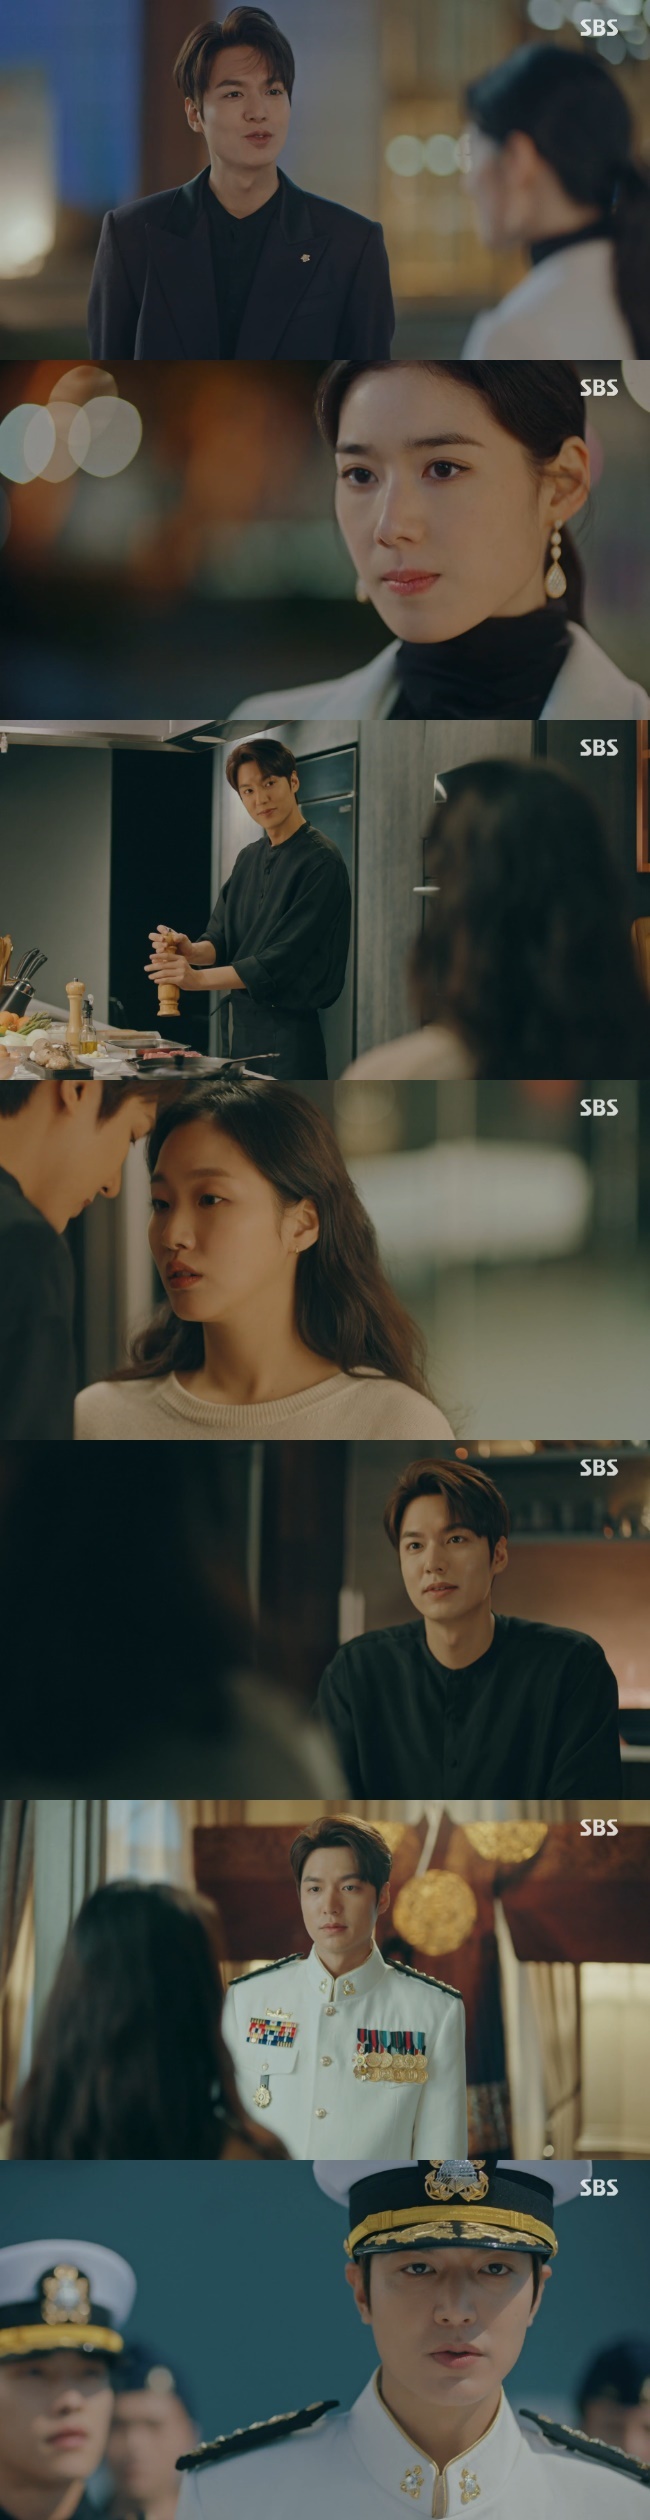 Lee Min-ho, who learned of Lee Jung-jins plan, felt that Kim Go-eun could be dangerous because of himself.Lee Min-ho, who was in the 6th episode of SBSs Golden Earth Drama The King: The Lord of Eternity (playplayed by Kim Eun-sook/directed by Baek Sang-hoon and Jung Ji-hyun), found out that Lee Jung-jin will soon come to him.After receiving a report that the emperor had returned the helicopter to Seoul, Koo Seo-ryeong (played by Jung Eun-chae) went to the place where Lee Gon was because of the suggestion that it would be a womans problem.Jeong Tae-eul greeted him, hiding his identity as a traveler, fearing that he would be embarrassed. Koo Seo-ryong showed jealousy when he saw him smiling at Jung-tae.Lee, who took care of the situation in front of Cho Young (Woo Do-hwan) and the Imperial House of Japan, made food for his own.Jung Tae-eul said, I was lonely when I was alone today. In my world. It was pretty hard to prove that I was me.Thank you for coming to pick me up. Lee said, I want to give you Tsudam Tsudam, but I have no hands. Jeong said, I dont think its the first time Ive ever had a relationship.But Igon hesitated to say, Are you going to show me the Identity document? I should go now. Igon said, Youre not going to send me?You have to live here. But I handed you the Identity document of the state I had 25 years ago.Jung Tae-eul confirmed that he had the same Identity document he had recently issued, but it was hard to believe that he had it for 25 years.I feel like Im going to show up once, because hes going to start or end all this. Youre the answer Im looking for.Whoever it was and whoever World won, so dont say good-bye to yourself.Japan sent an Aegis ship to press the Korean Empire, and Koo called the NSC, and Lee went out to do what his ancestors did.Imperial House of Japan wears military uniforms at the most honorable moment, Lee said, handing the Identity document to Jung Tae-eul.Ill be right back with honor. Will you wait?So Jung Tae-eul nodded, saying, Ill see you again. Lee said, I thought it was a name I did not call, but it was a name I only asked you to call.Japan pressed it as it crossed the territorial waters of the Korean Empire.Igon said to those who were worried about his well-being, It is not me that you have to protect, but this sea. He prepared for war and fired warnings to the Japan camp.Japan eventually retreated after making a decision to suspend the warship.Jung Tae-eul analyzed the voice recorded on the cell phone, which is the clue of the incident he was tracking.Jung Tae-eul, who did not have any clues even if he continued to listen, was surprised when Yi Jong-in (premier Song) name, which he searched for in Korean Empire, came out..Yi Jong-in, who returned from the society, visited Igon and delivered a certificate with the real sign of Irim.Yi Jong-in said that the cause of death was not a shoot by the guards but a cervical fracture, and questioned that the body, which was found to have the same fingerprint and blood type, was suffering from congenital polio.Igon looked at the optometrist and said, The concern of the road palace was right. The reverse is alive and the addition to the road is the door to another World.I have half of my ink, and he will come to find the half of me. After that, he went to World in parallel and visited Korea. How are you?Did I wait? He nodded and ran to Igons arms with tears full of tears.Lee Ha-na